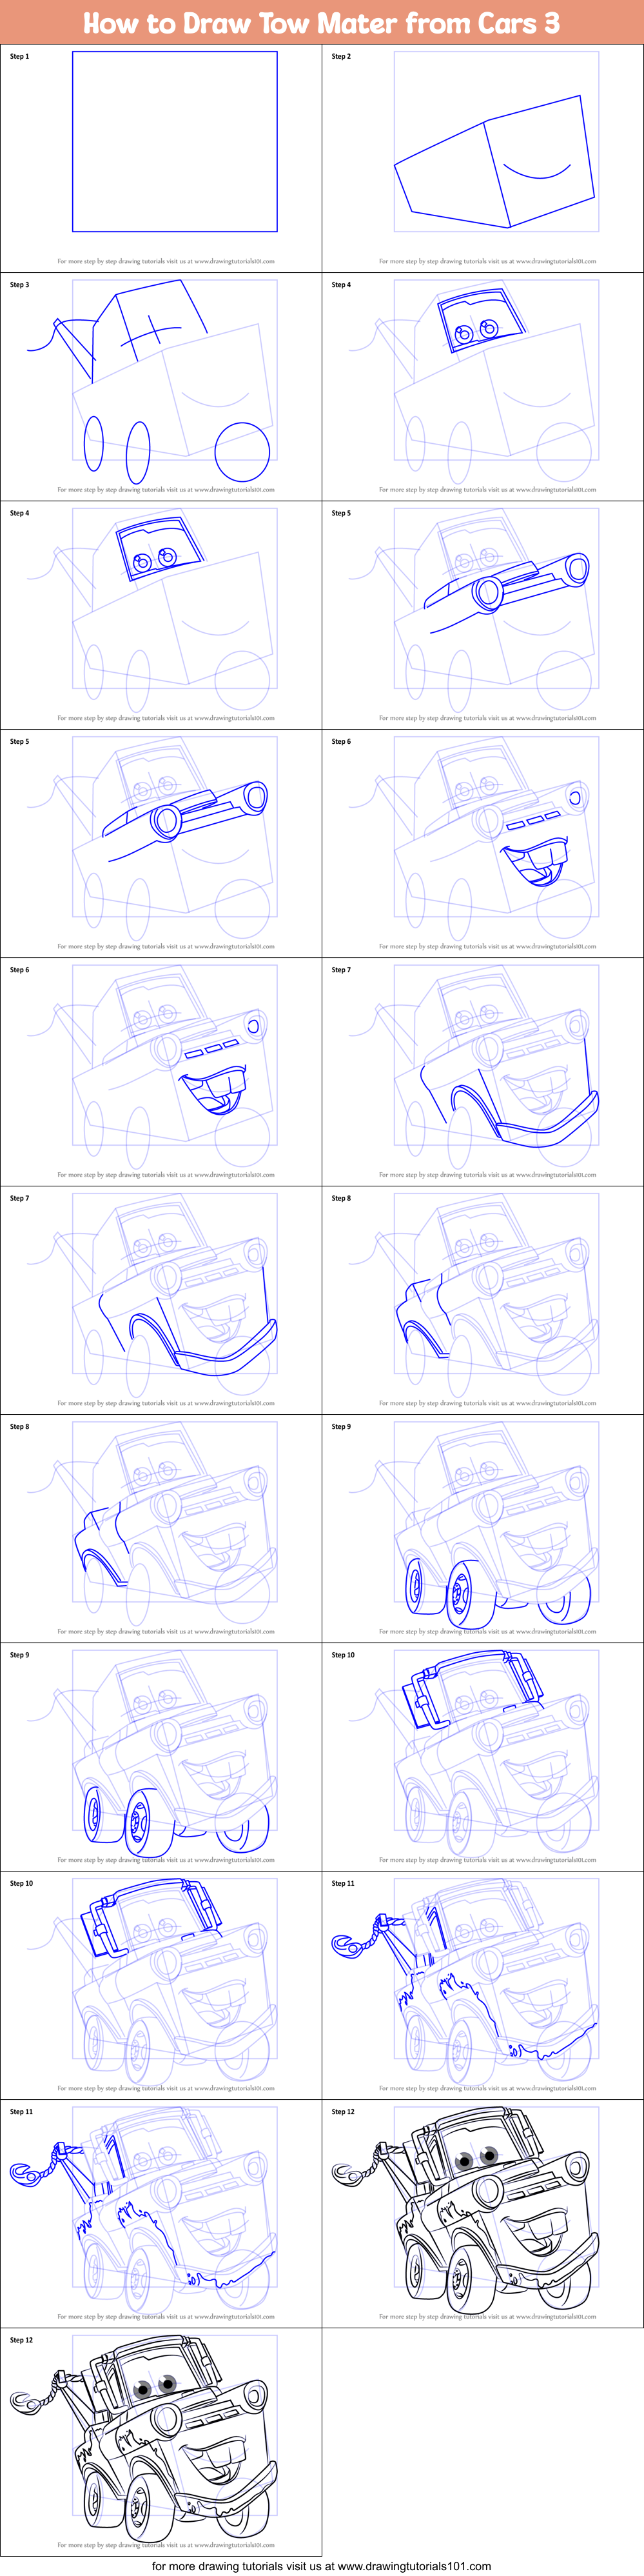 How to Draw Tow Mater from Cars 3 printable step by step drawing sheet